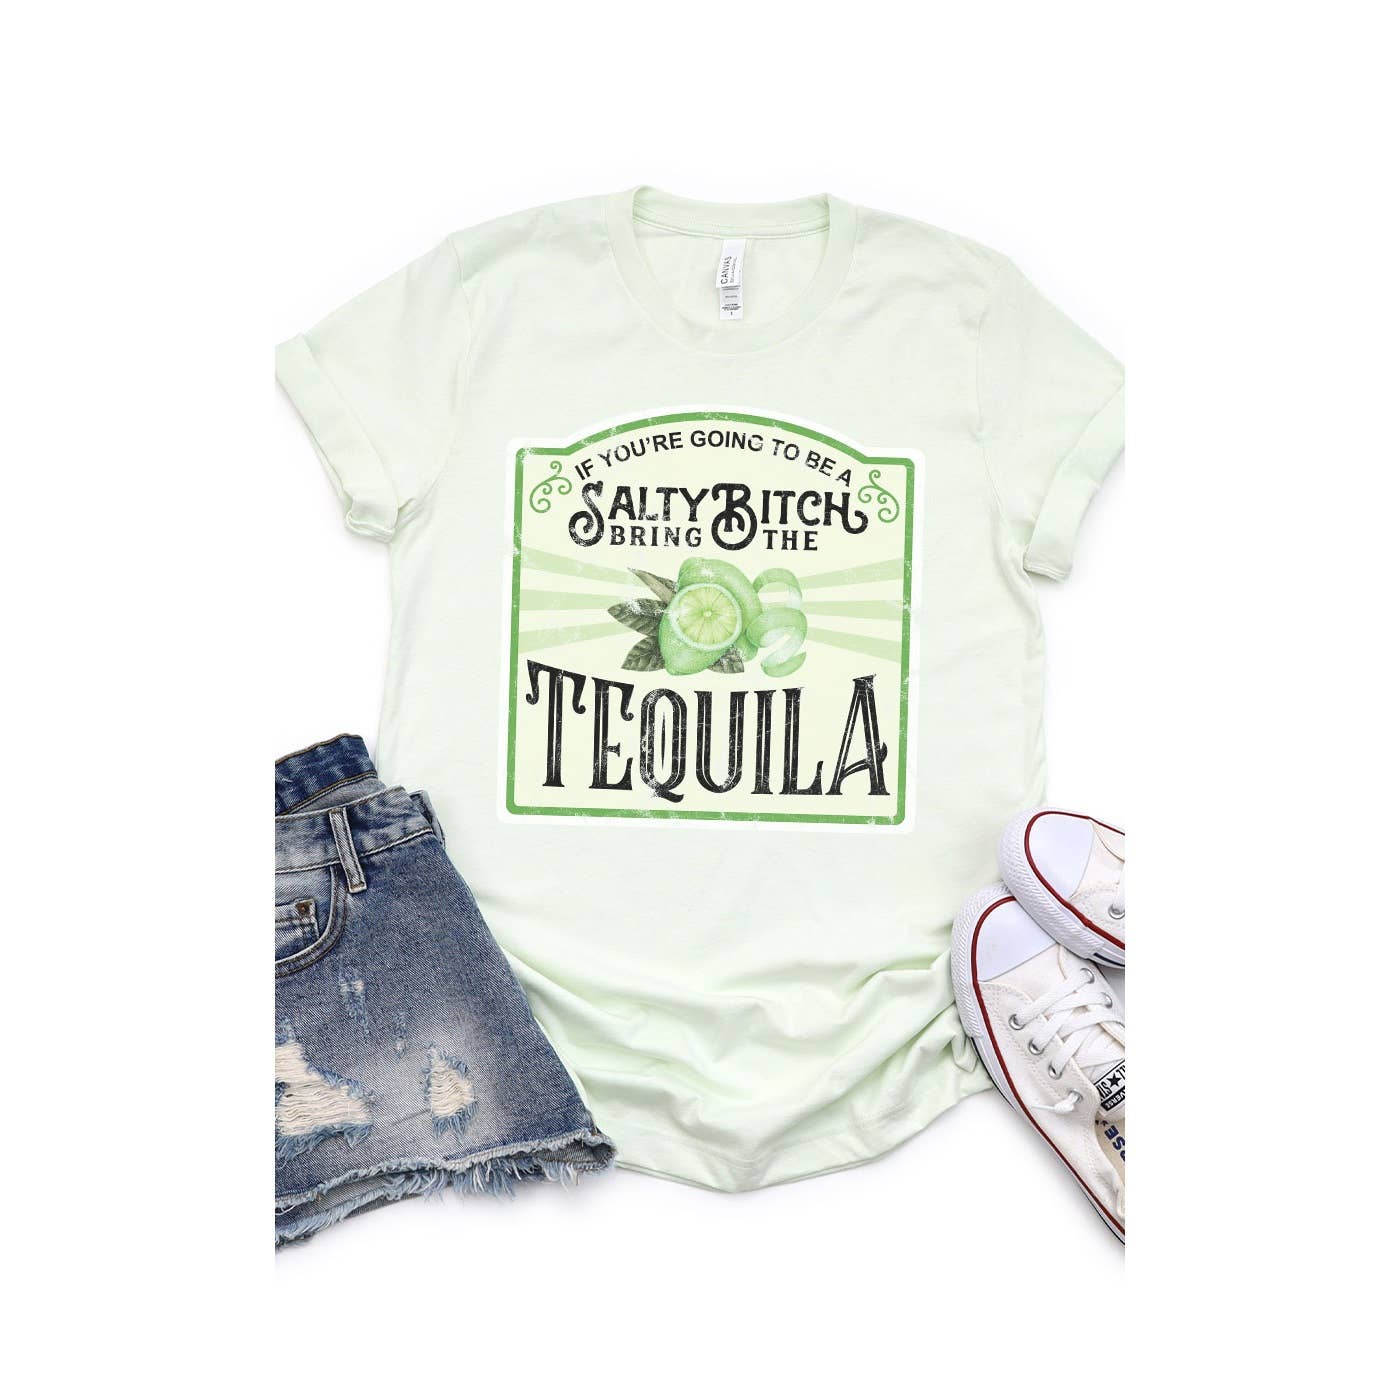 Salty Bitch Bring Tequila Graphic Tee